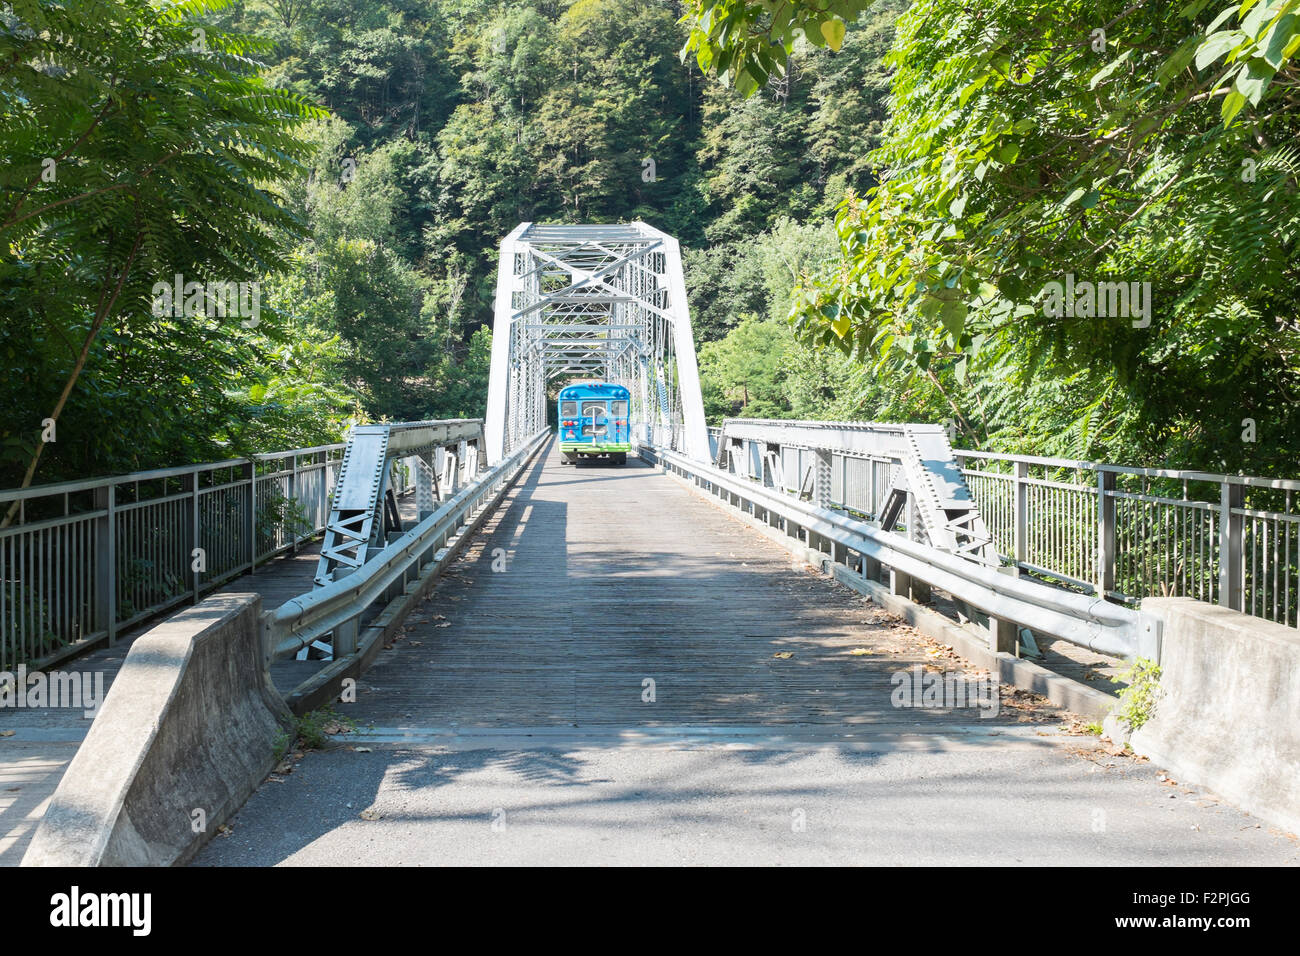 The old Feyette Station Bridge which crosses the New River Gorge Stock Photo